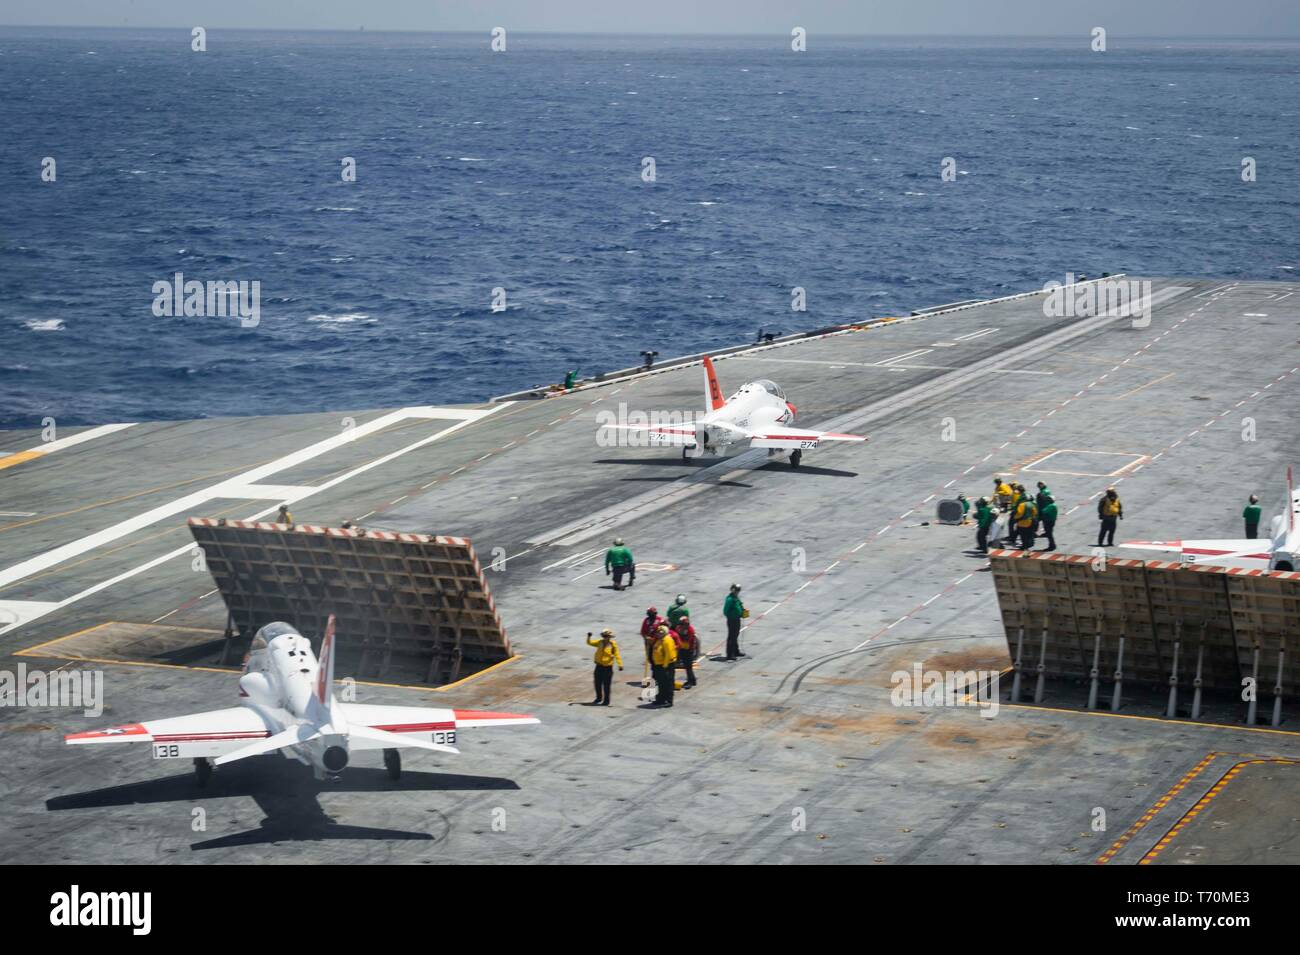 190502-N-KT825-0180  ATLANTIC OCEAN (May 2, 2019) A T-45C Goshawk training aircraft assigned to Training Air Wing (TW) 2 launches from the flight deck aboard the aircraft carrier USS Dwight D. Eisenhower (CVN 69). Ike is underway in the Atlantic Ocean conducting carrier qualifications while in the basic phase of the Optimized Fleet Response Plan. (U.S. Navy photo by Mass Communication Specialist Seaman Sawyer Haskins) Stock Photo